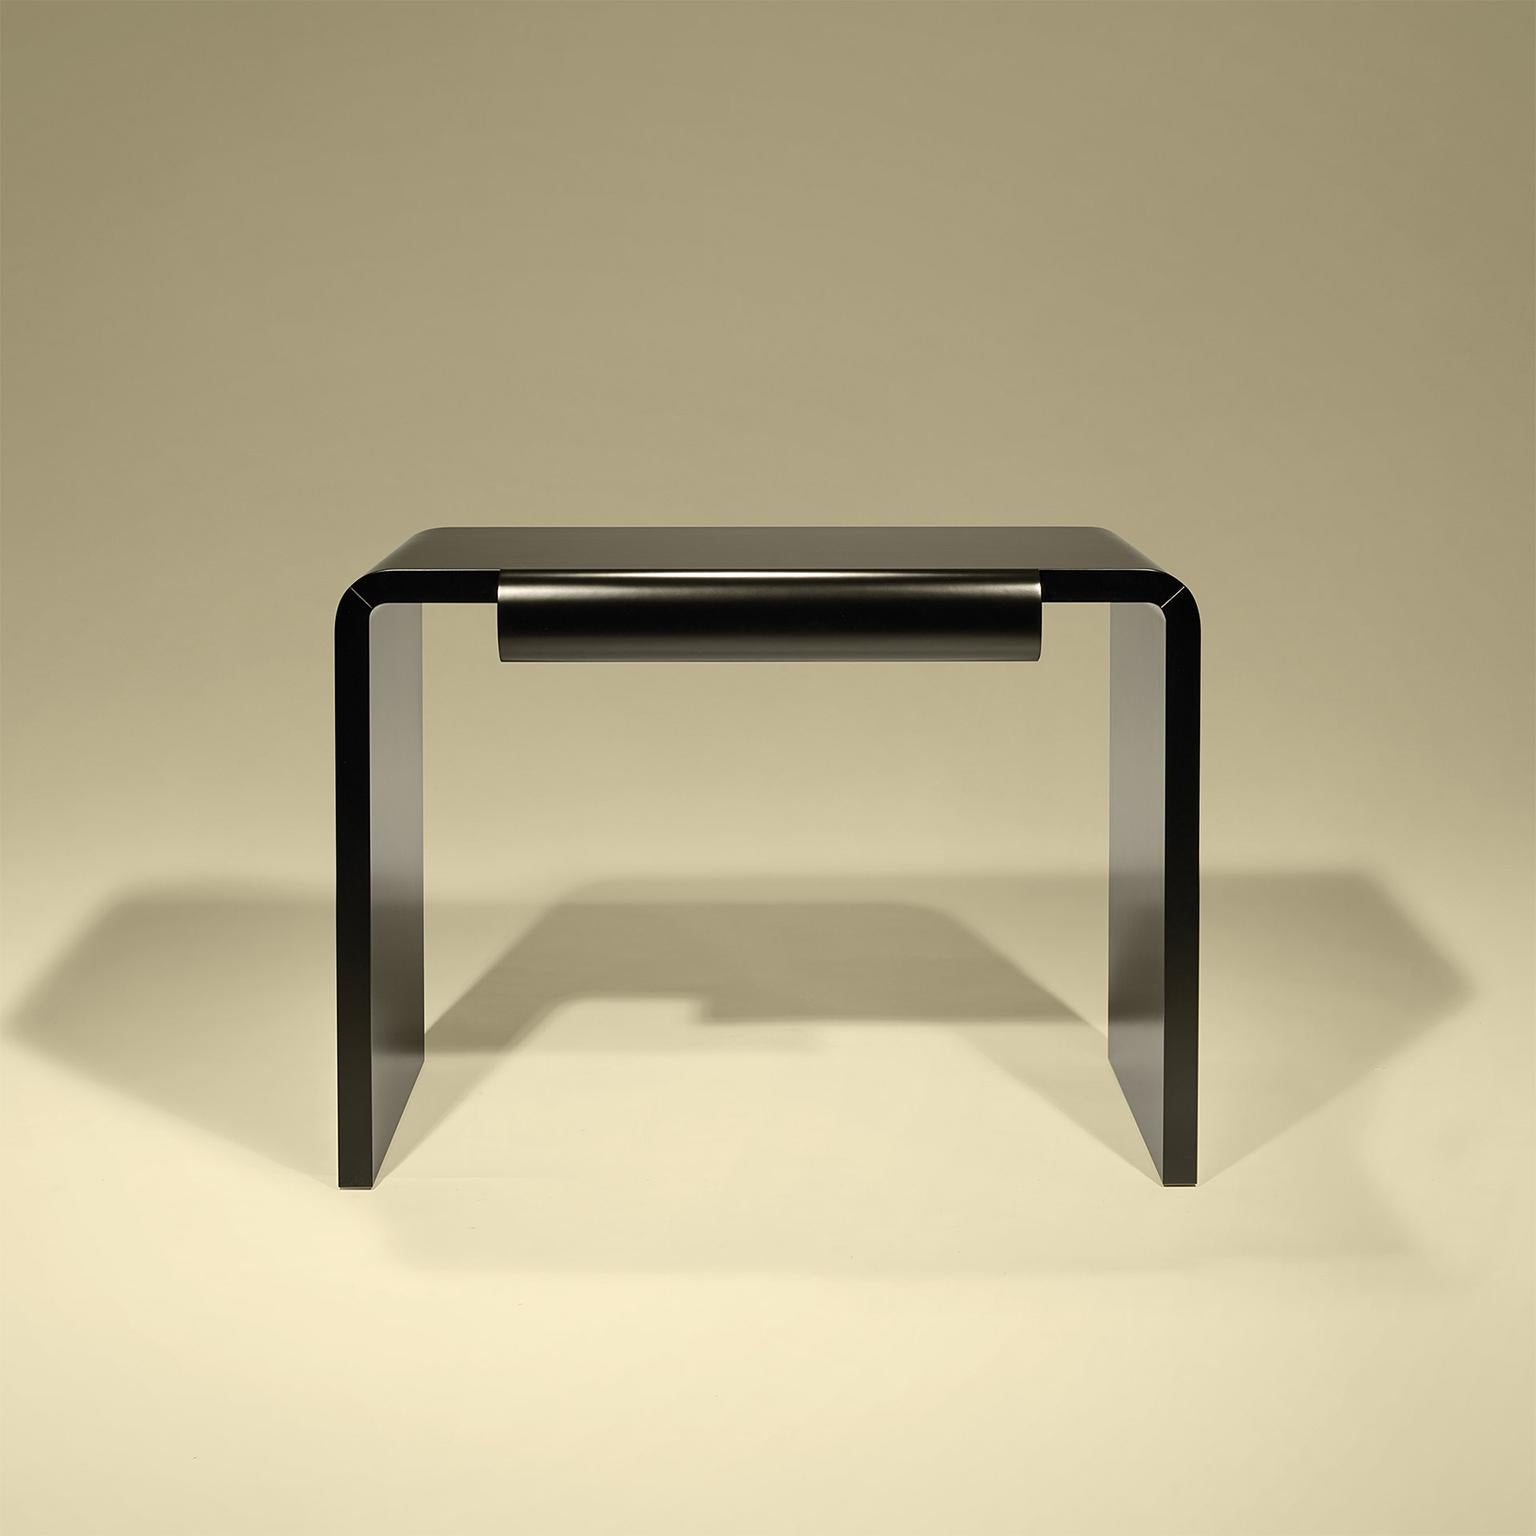 Console Table in black lacquer with one drawer and grey Partridge eye finish.

Bespoke / customizable
Identical shapes with different sizes and finishings.
All RAL colors available. (Mate / half gloss / gloss).